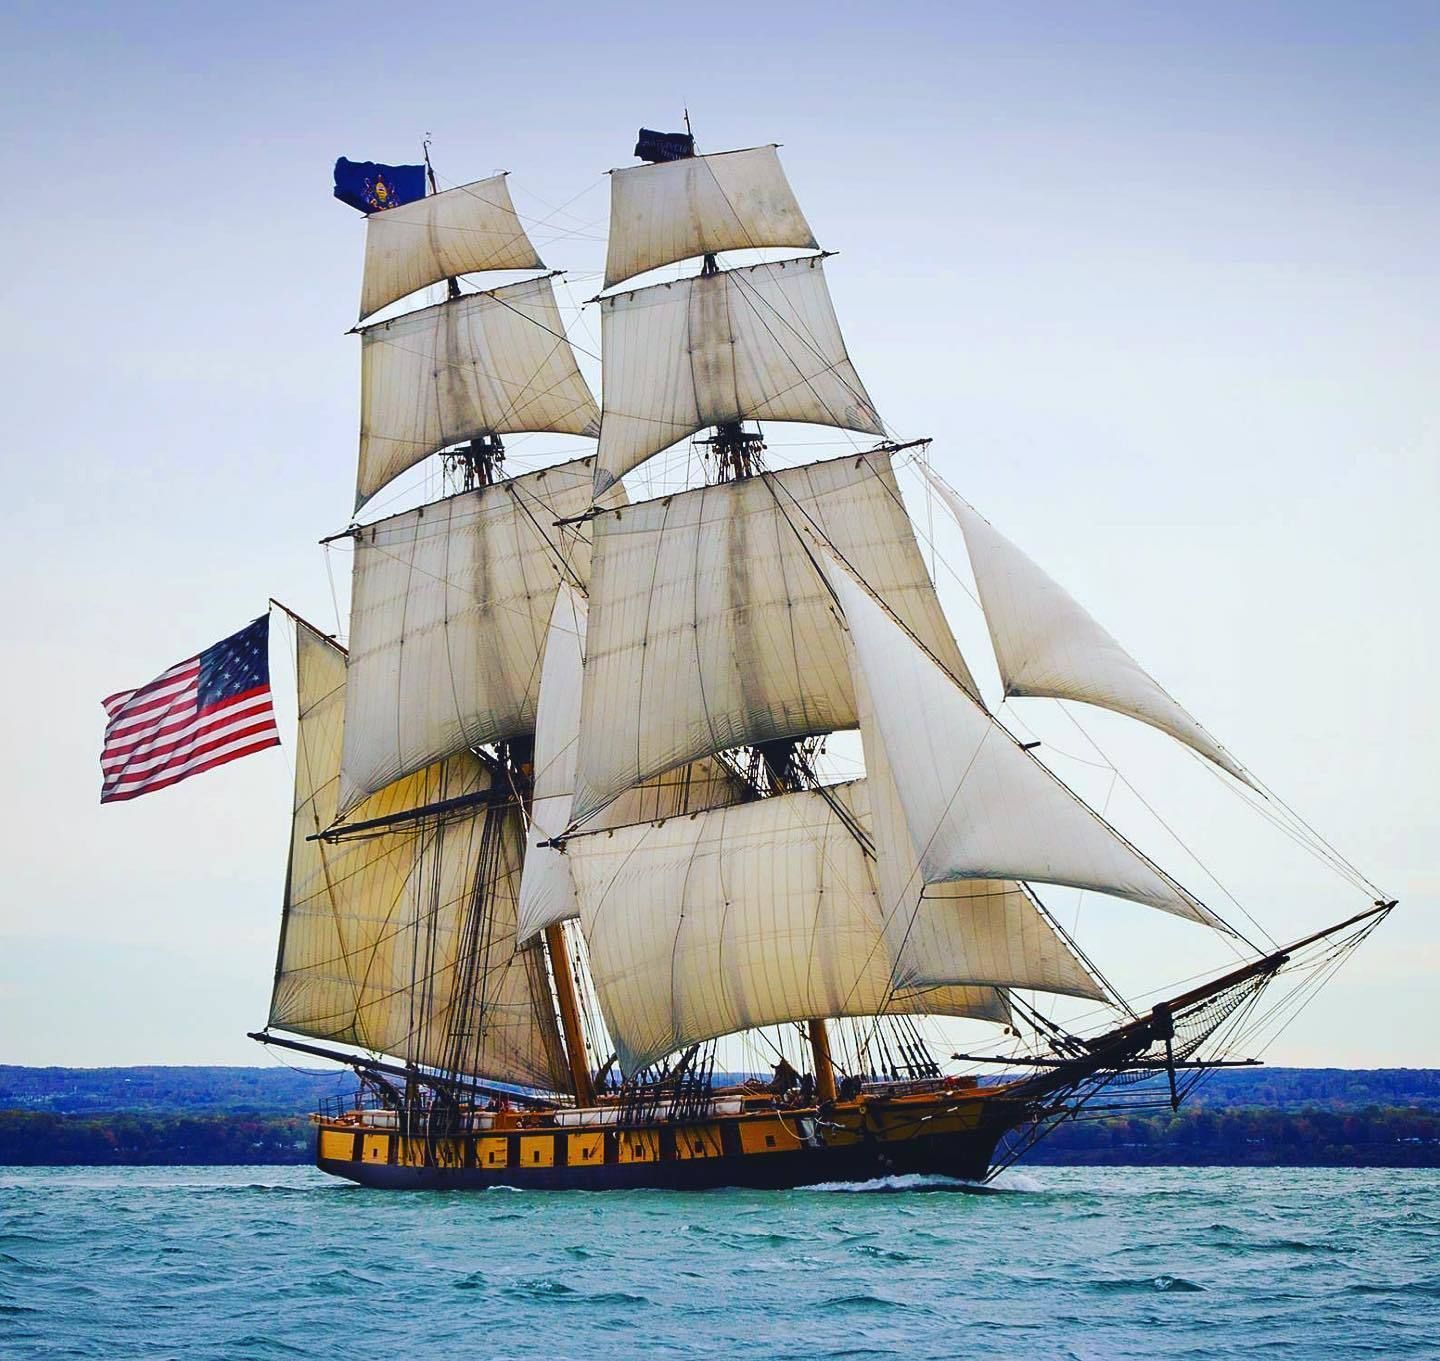 PHMC and Flagship Niagara League Finalize Sailing Schedule, Plans for Tall Ships® Erie 2022